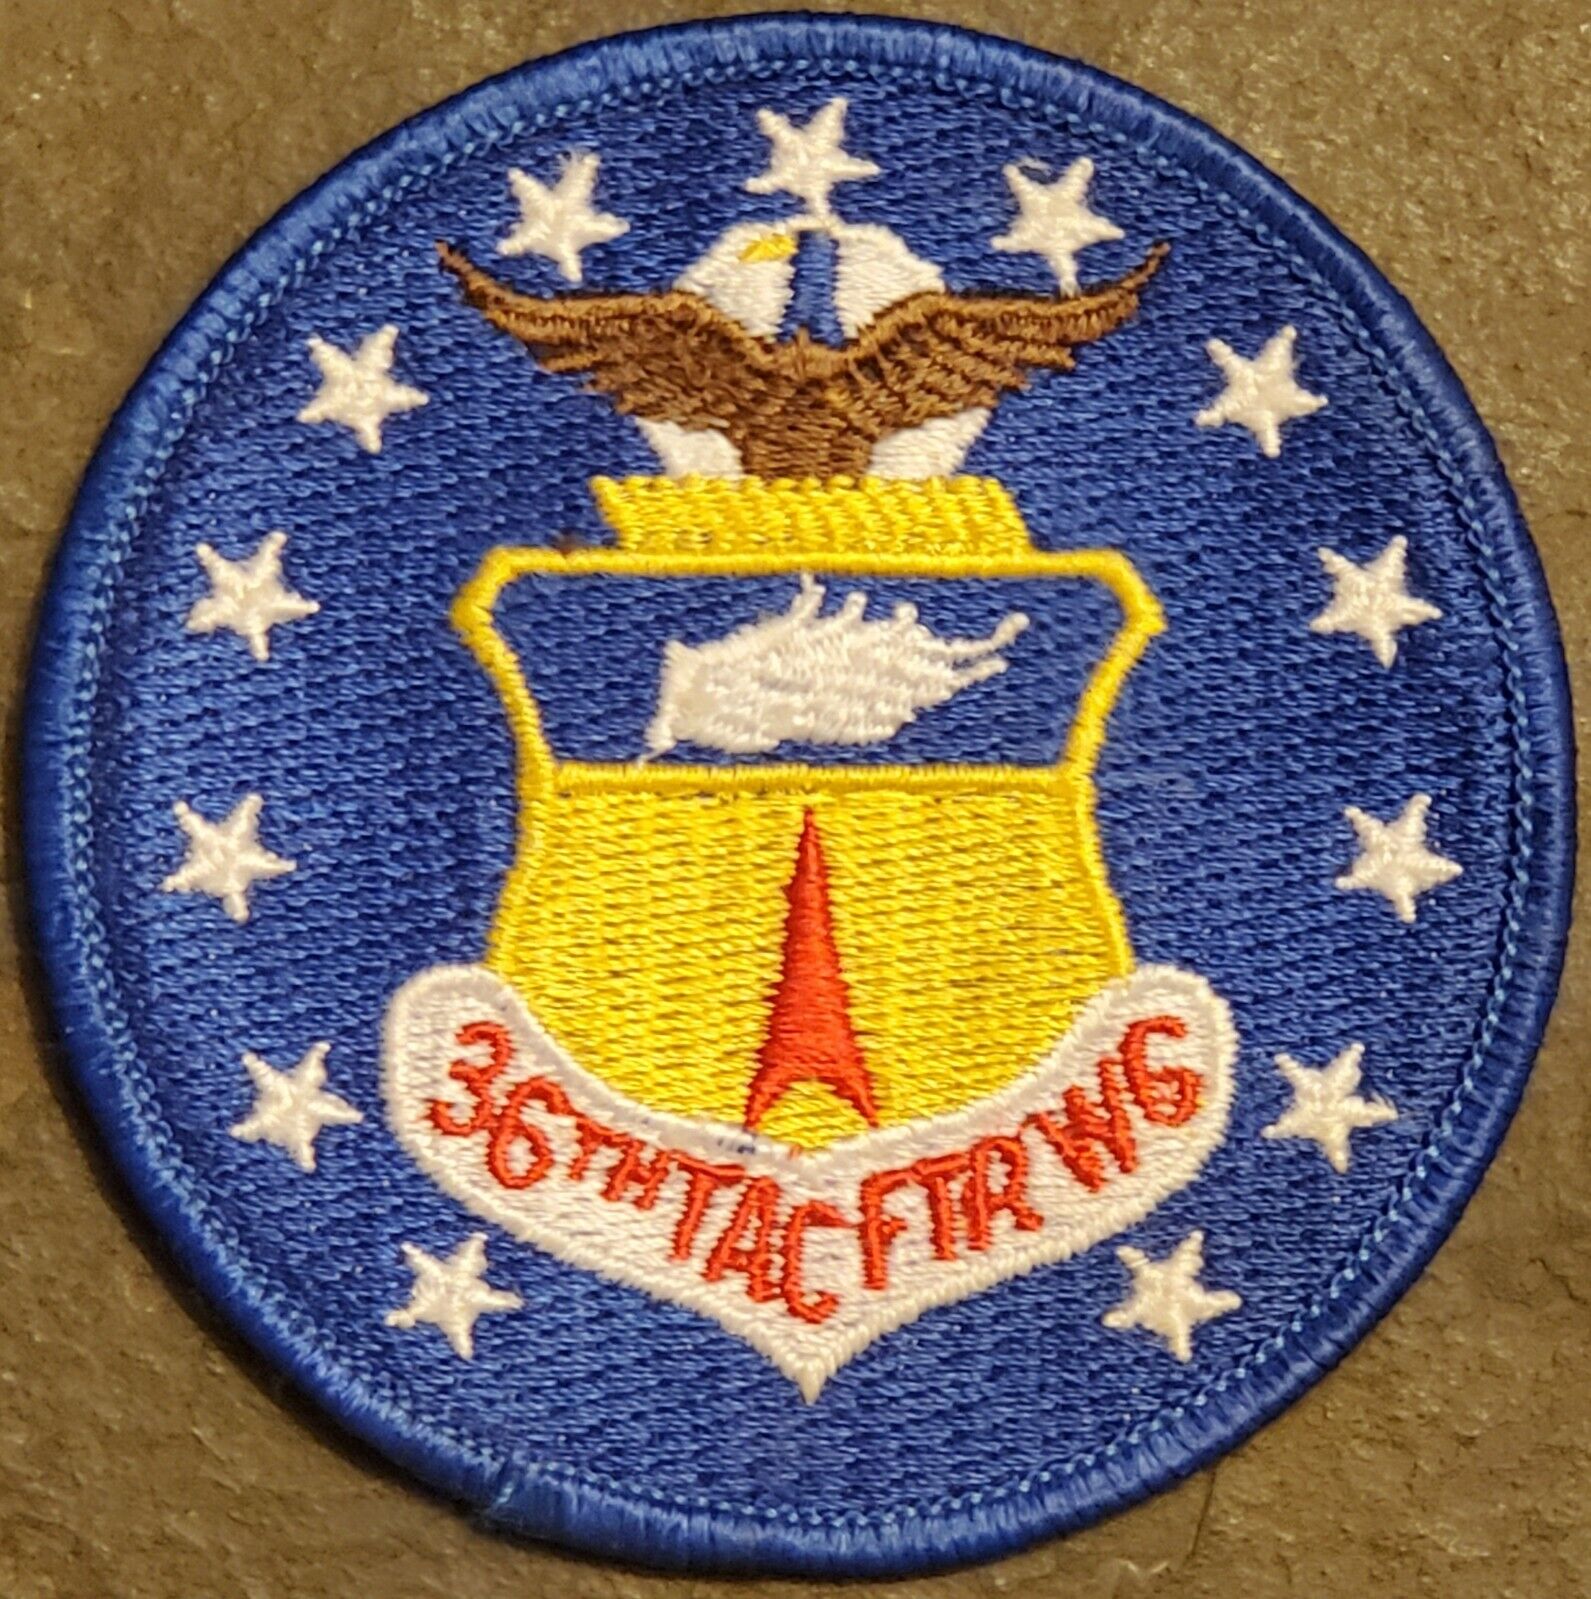 USAF 36th Tactical Fighter Wing Patch: ANDERSON AFB, GUAM: SUBDUED VTG ORIGINAL